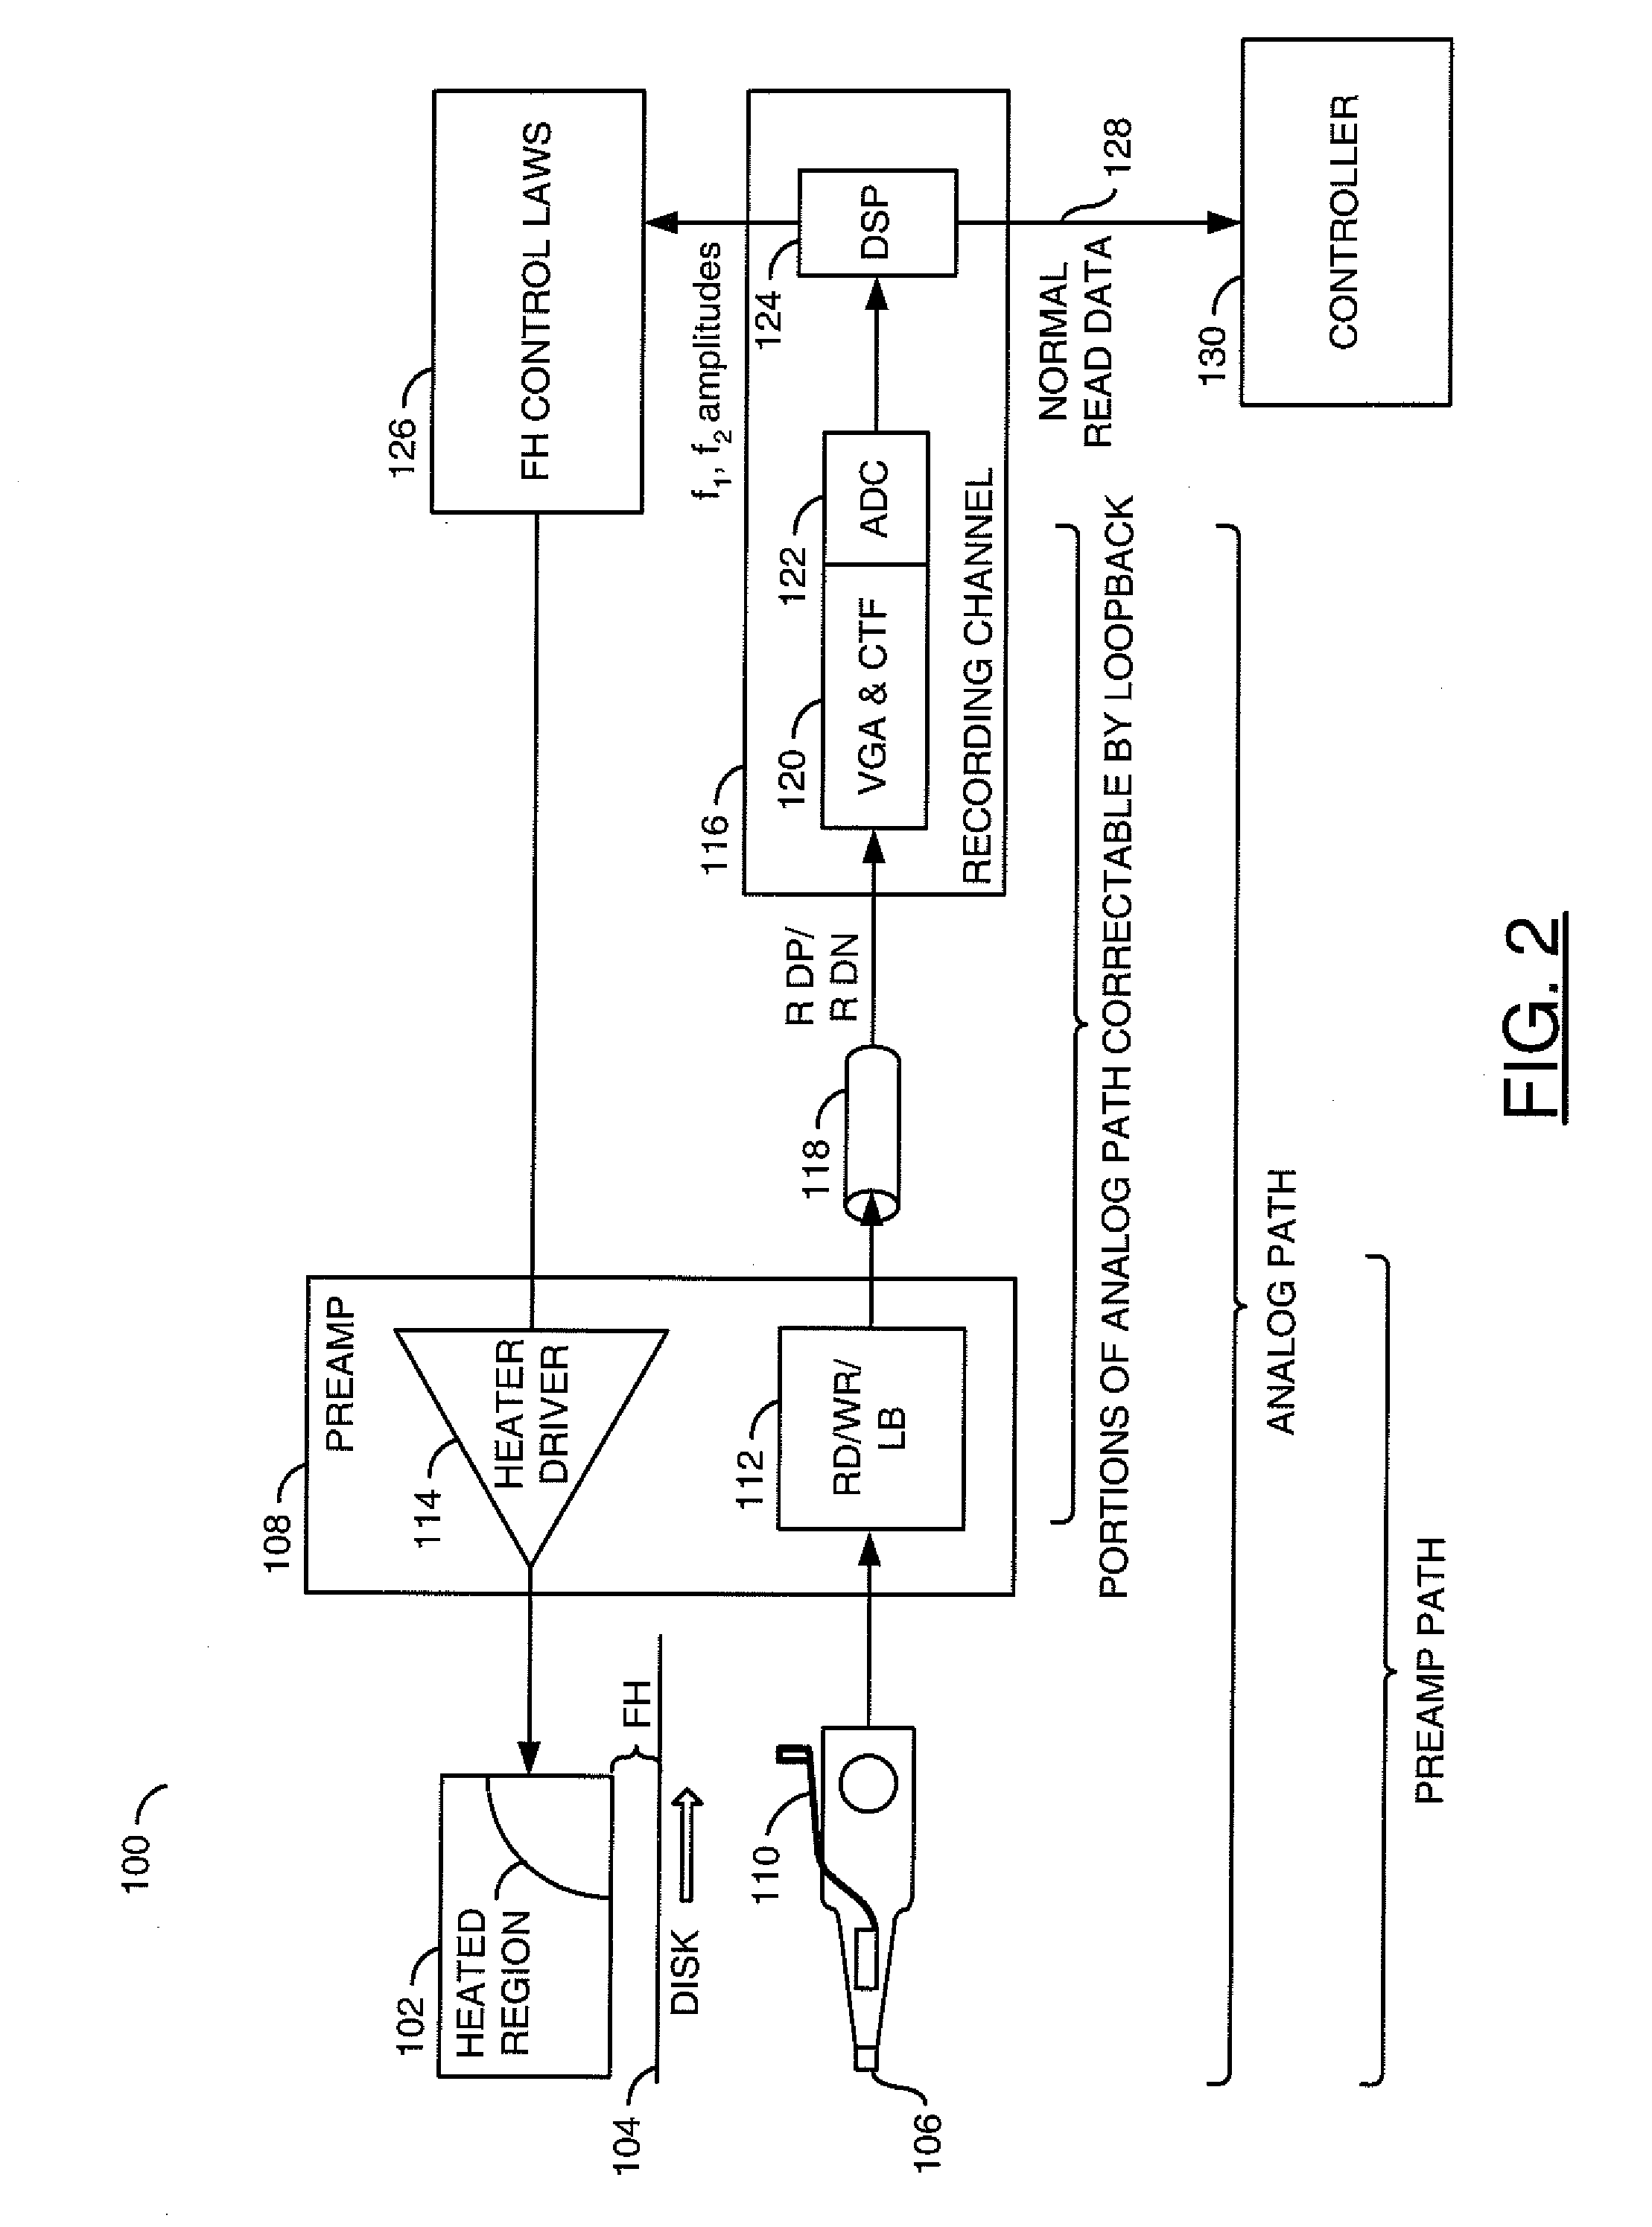 Disk file preamplifier frequency-response and time delay compensation